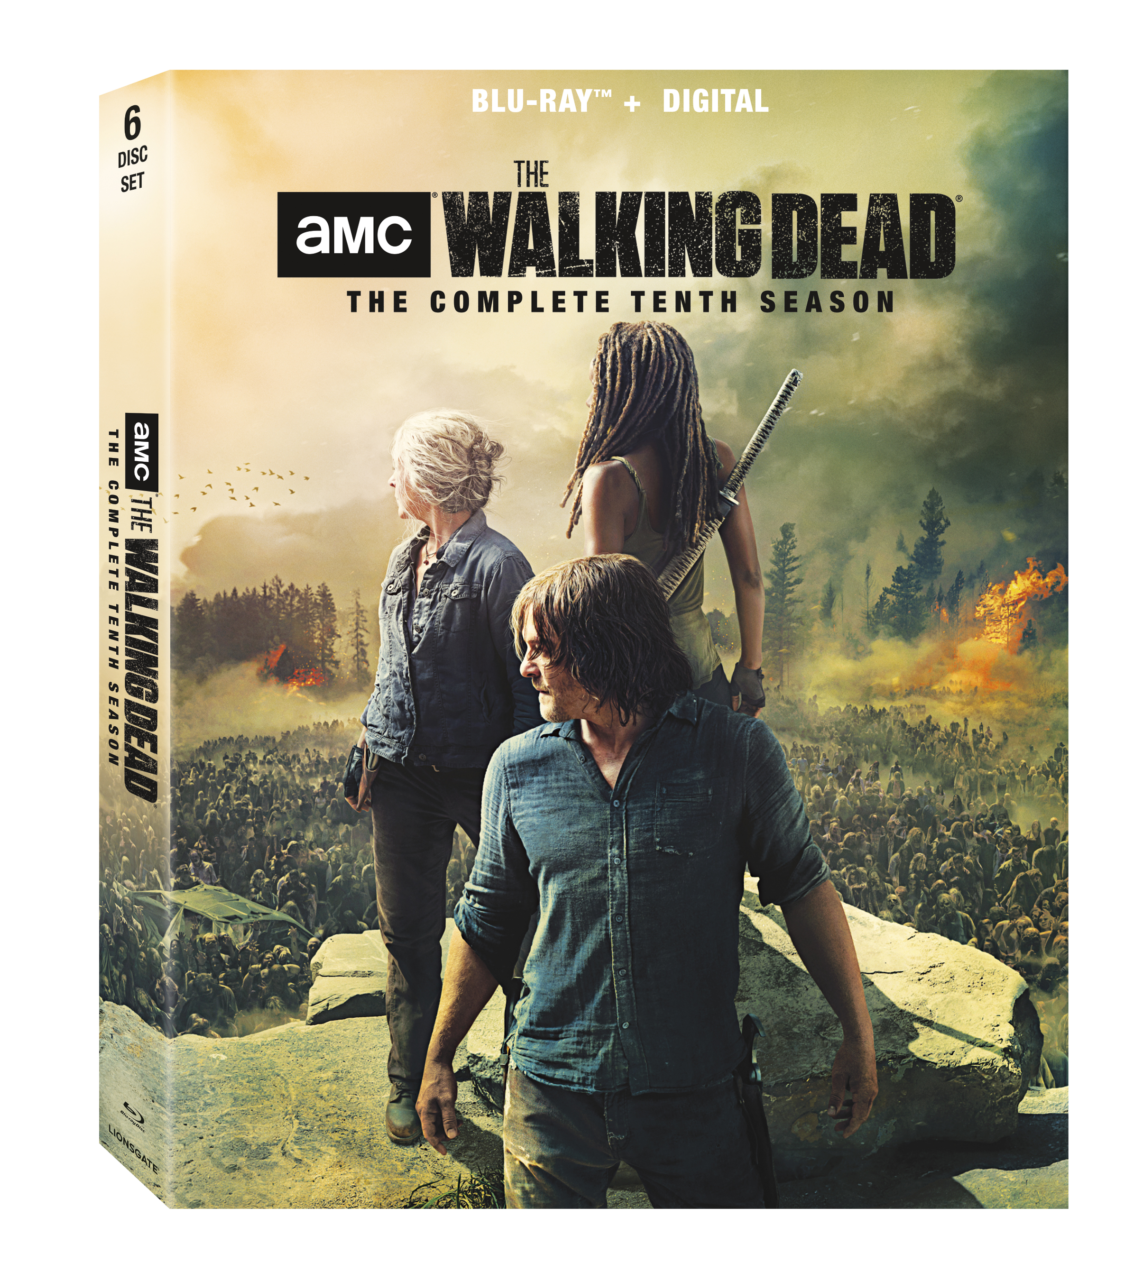 The Walking Dead: The Complete Tenth Season Blu-Ray Combo Pack cover (Lionsgate)